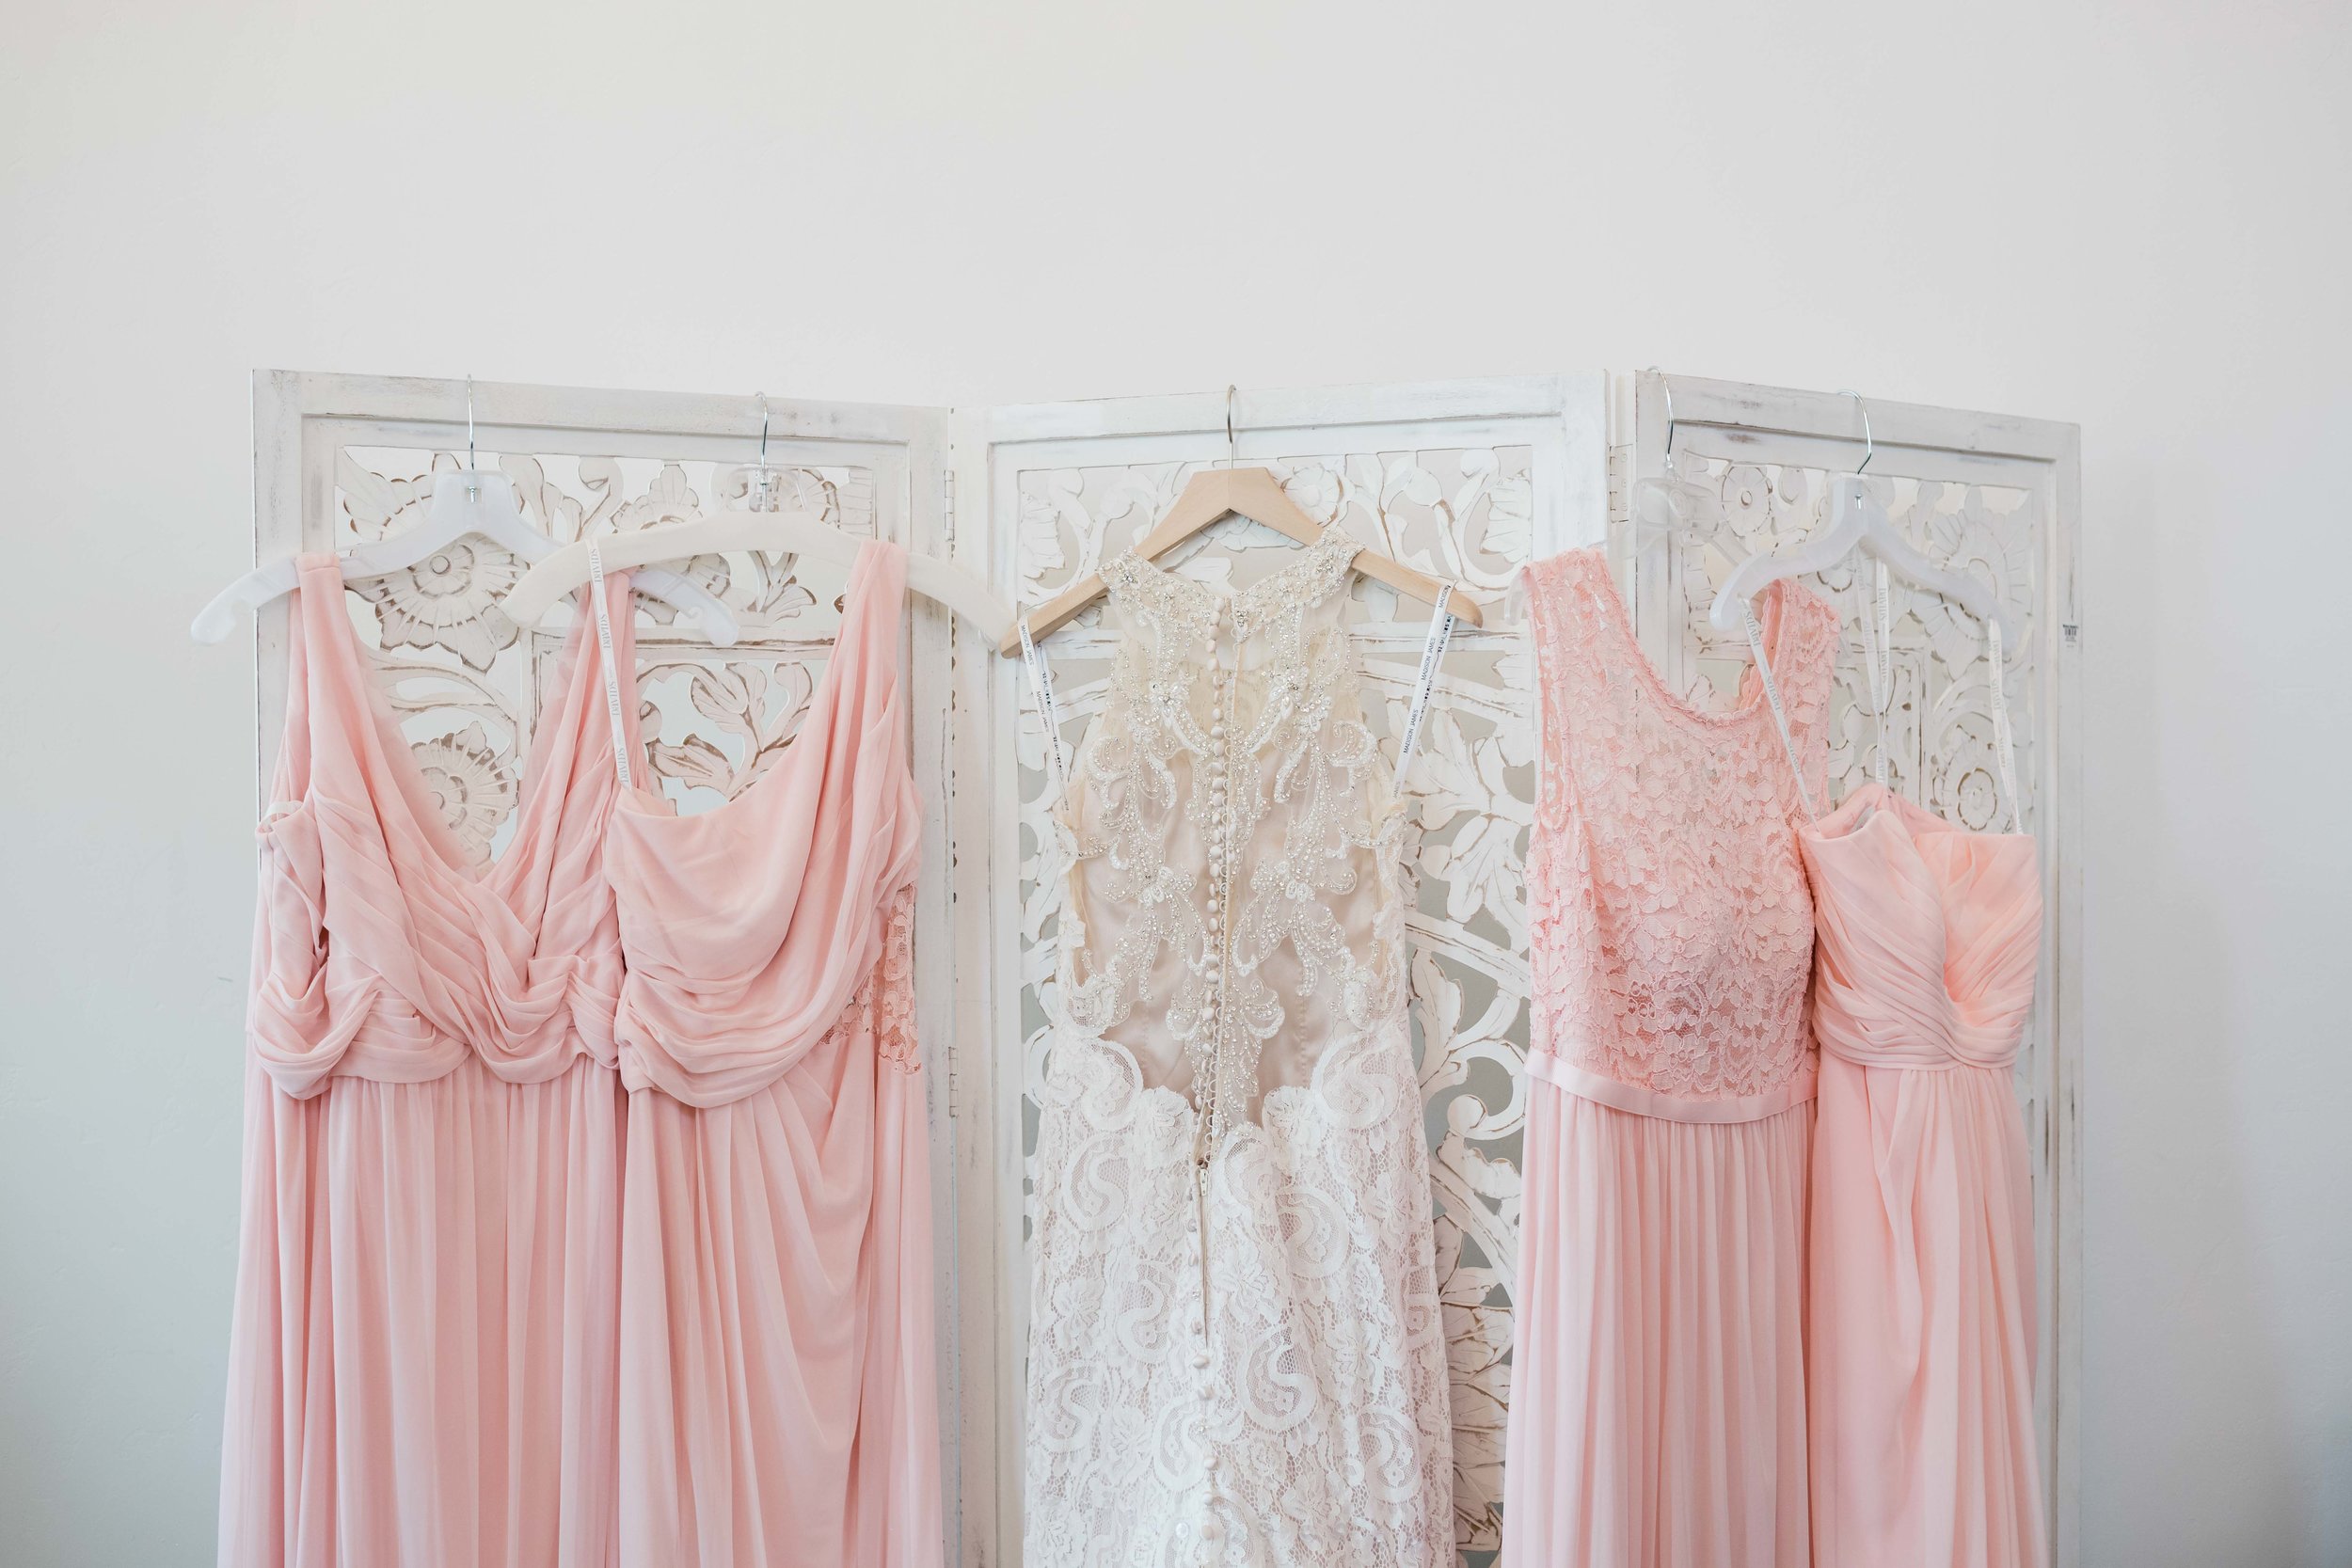 Bridal and bridesmaids gowns hanging up